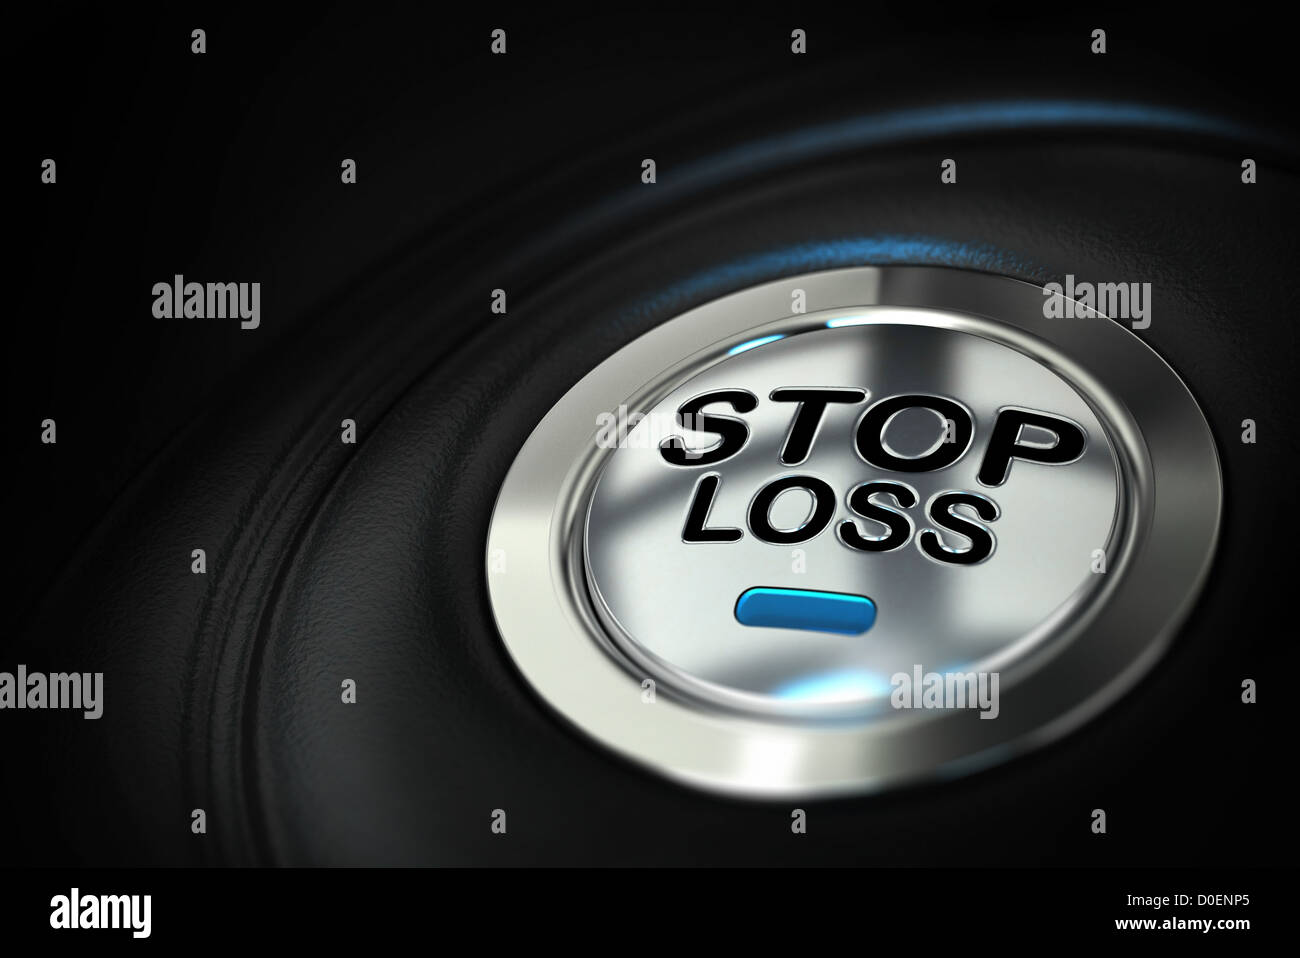 stop loss button with blue led over black background, finance concept Stock Photo